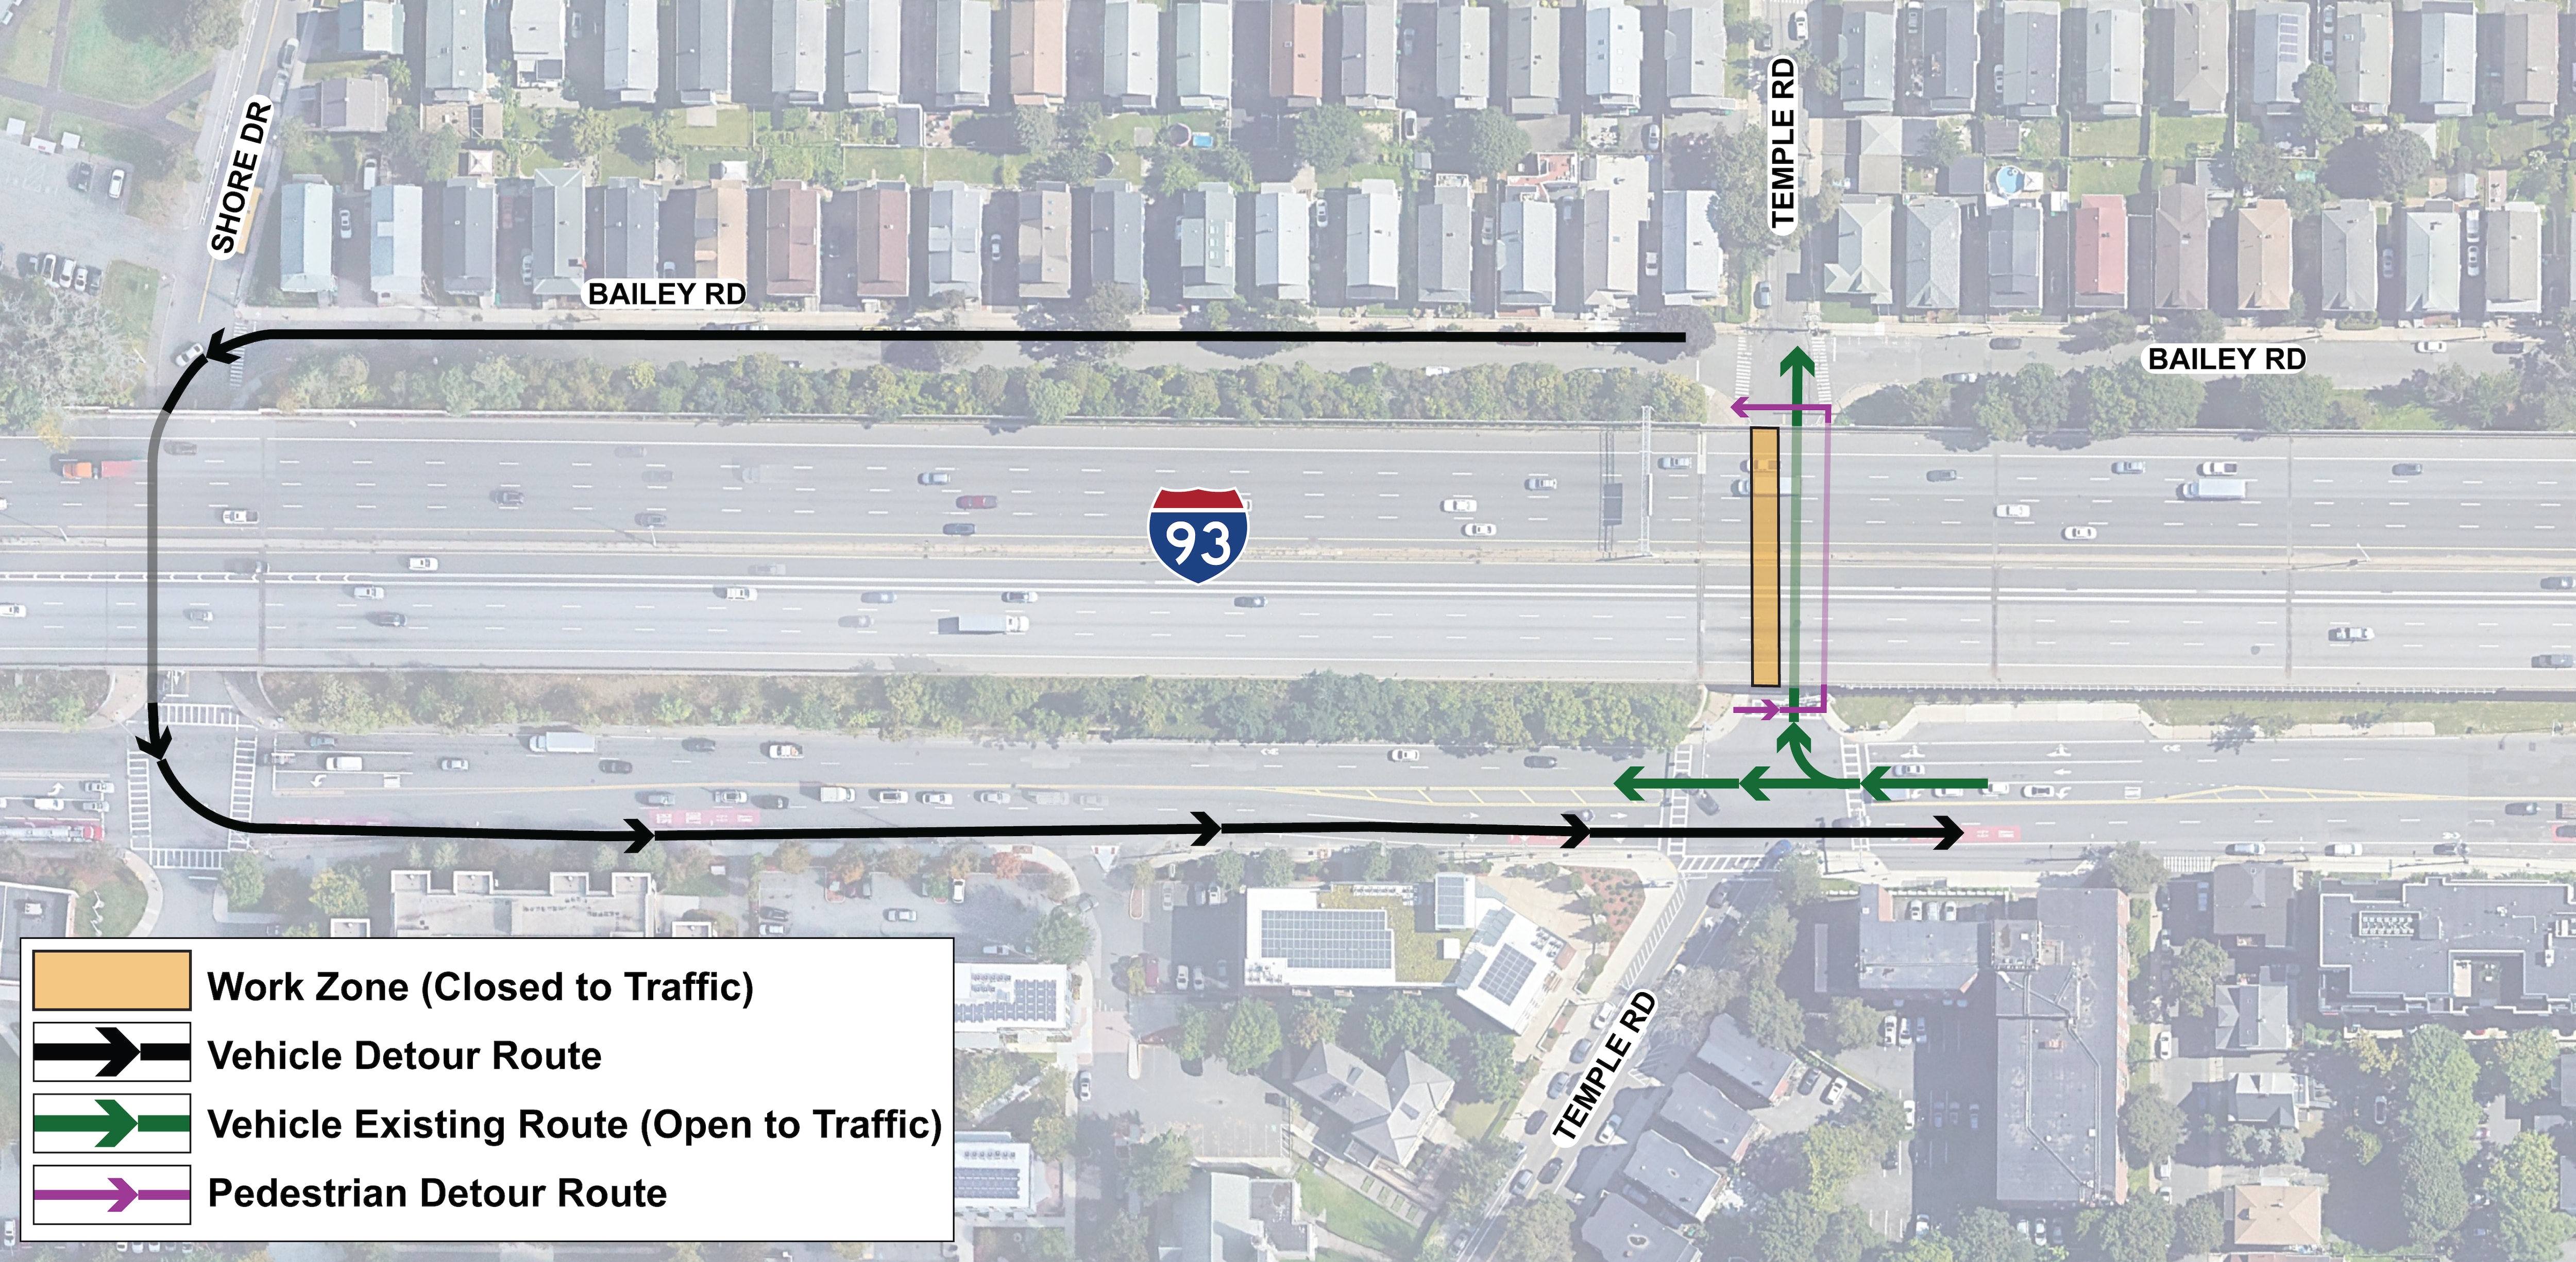 An aerial graphic showing the project location. The detour is depicted by an arrow going up Bailey Road, onto Shore Drive, and onto Mystic Avenue. The key reads, “work zone (closed to traffic), vehicle detour route, vehicle existing route (open to traffic), and pedestrian detour route.